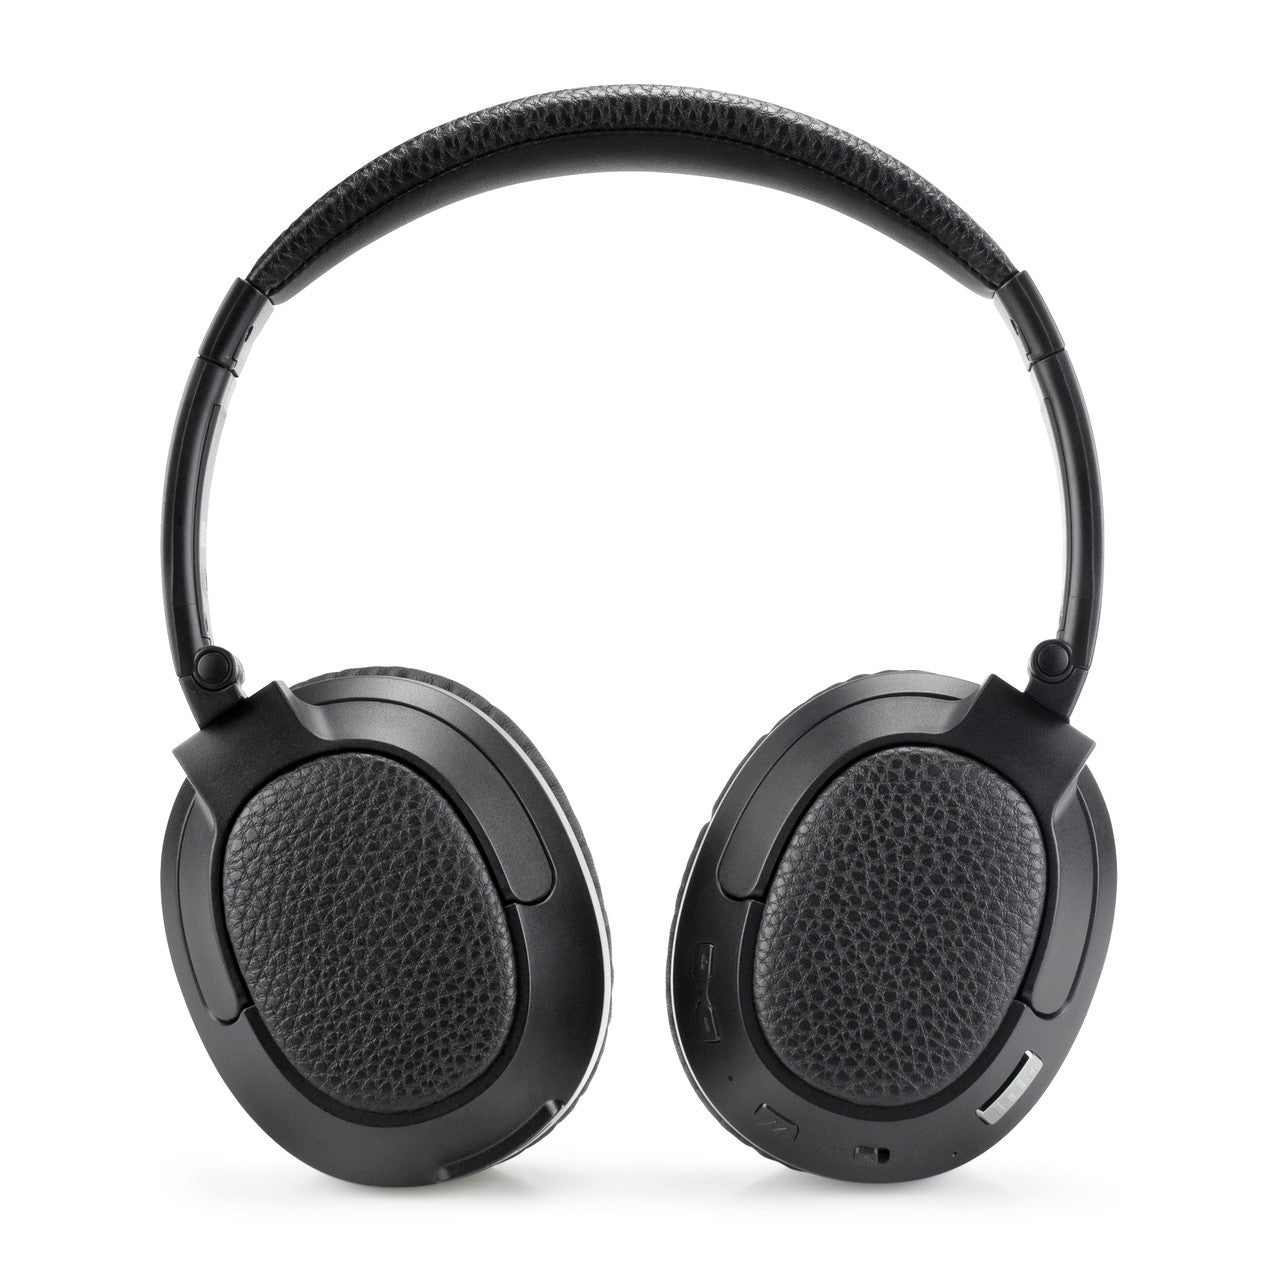 Image of [Refurbished] Matrix Cinema Low Latency Bluetooth Wireless Headphones for TV with CinemaEAR.